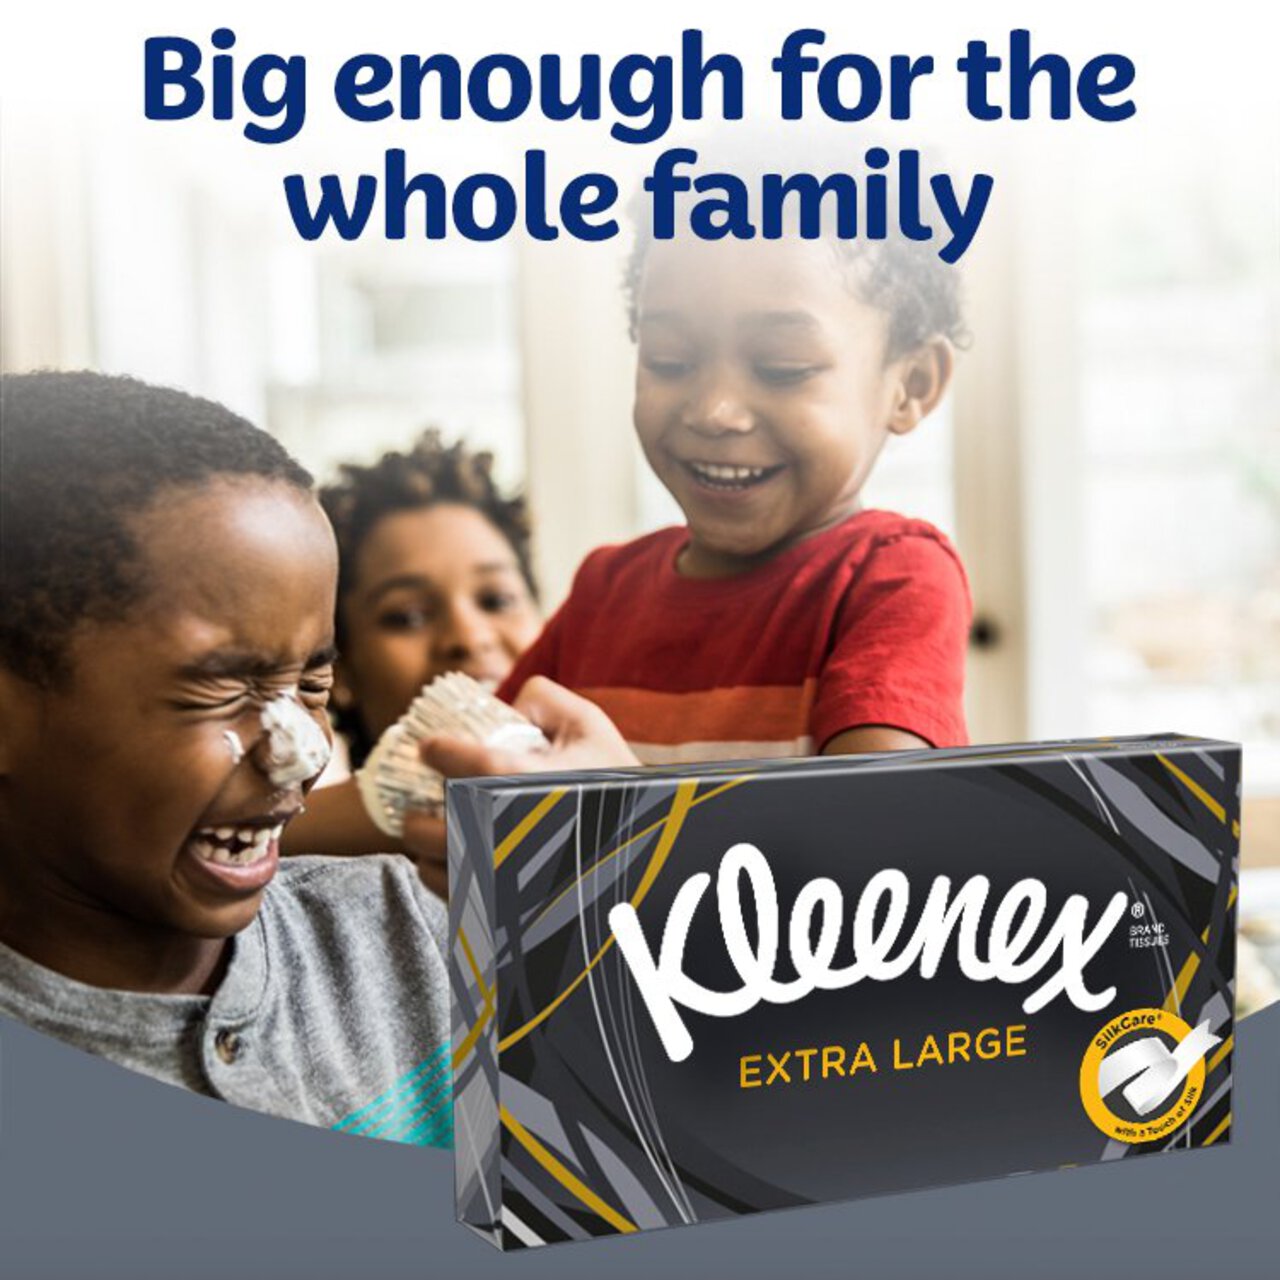 Kleenex Extra Large Facial Tissues - Twin Box 2 x 90 per pack